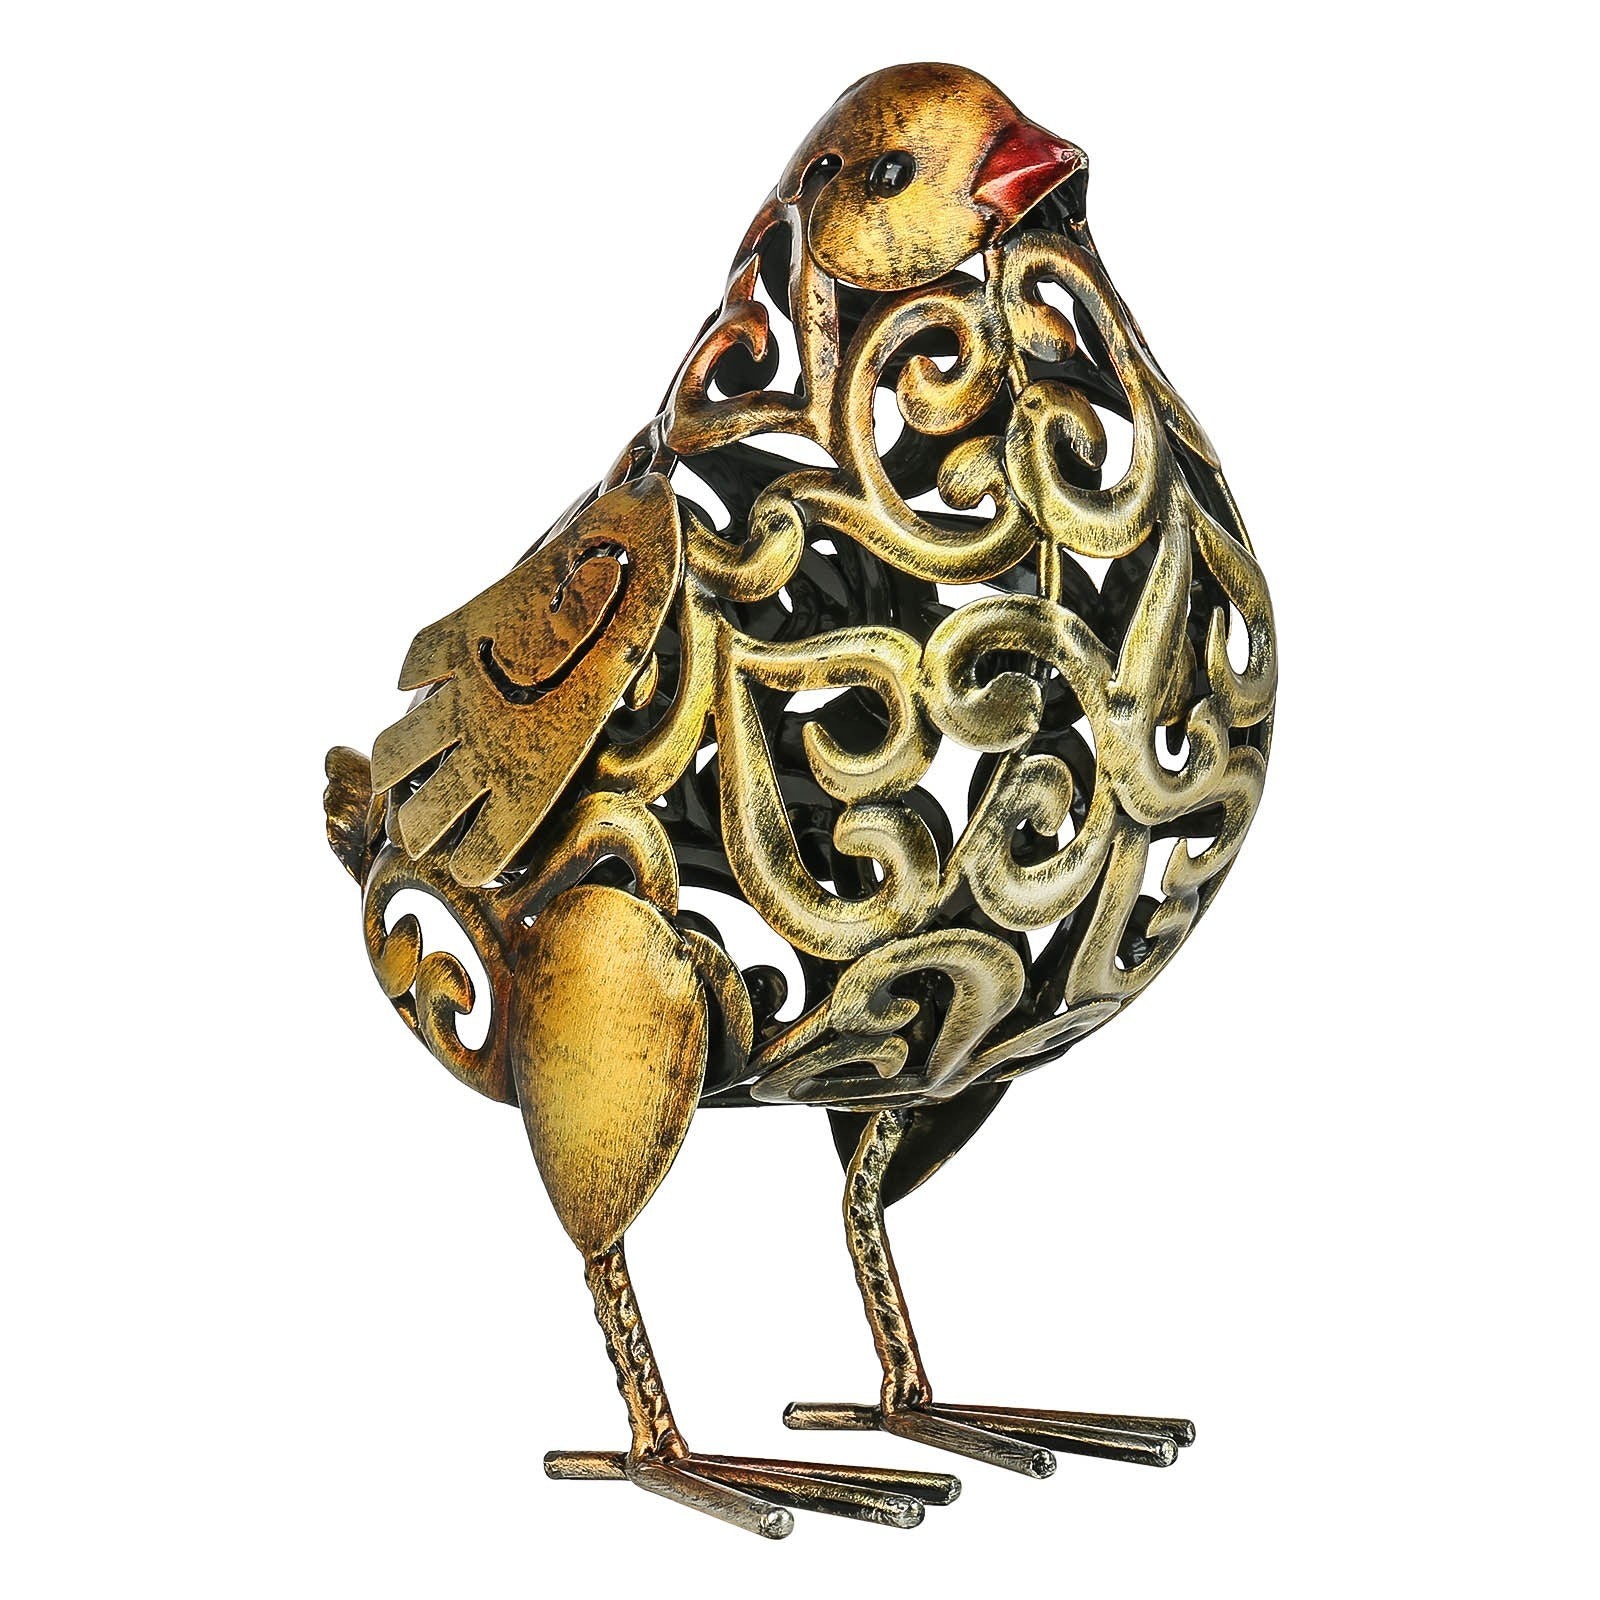 Rooster or Hen Sculpture to get classy with your garden decor!